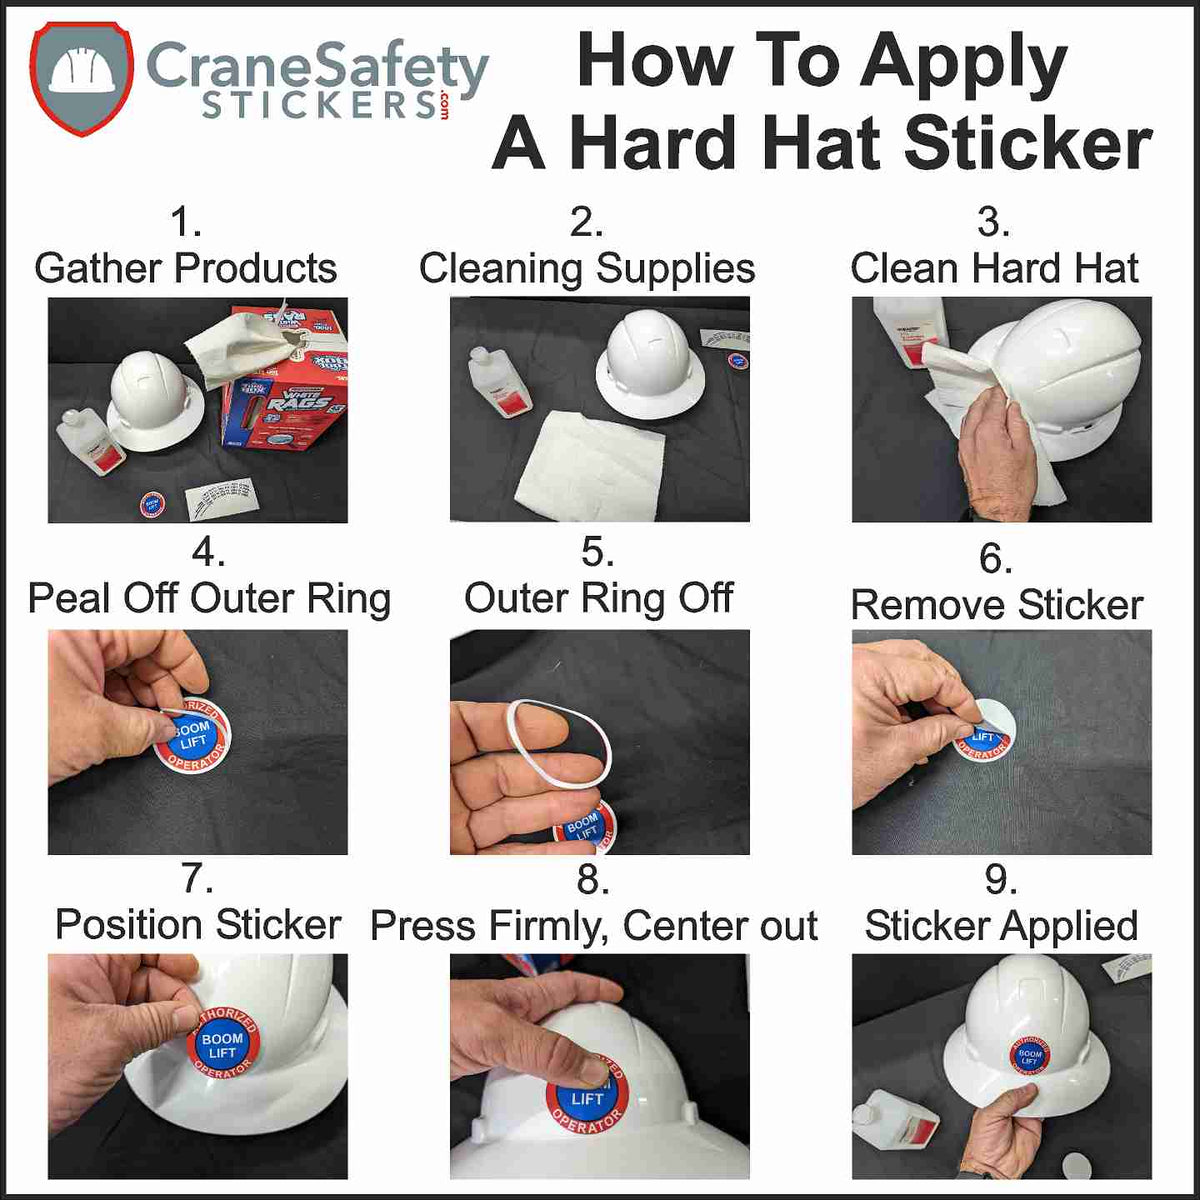 Directions on how to apply our blue and white accident free four year award sticker to a hard hat.